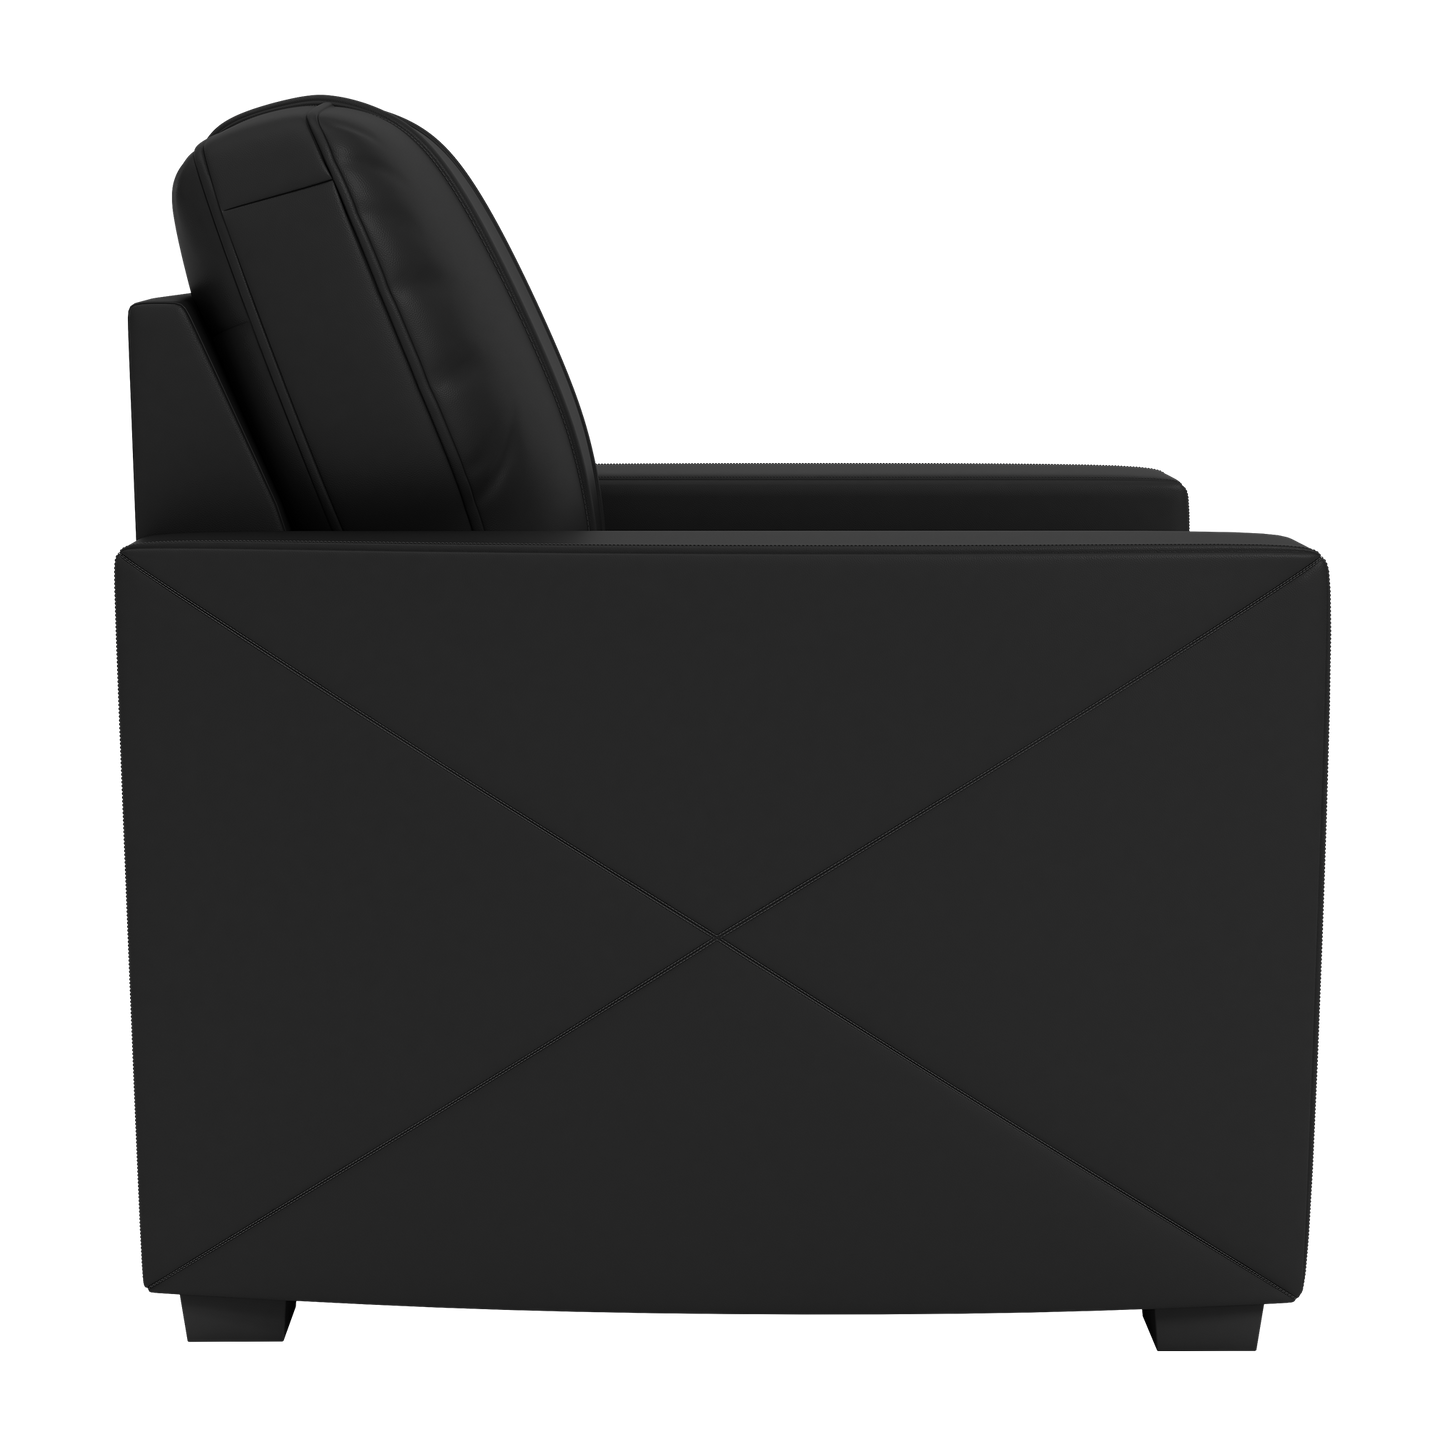 Silver Club Chair with Isles Gaming Team with Text Logo